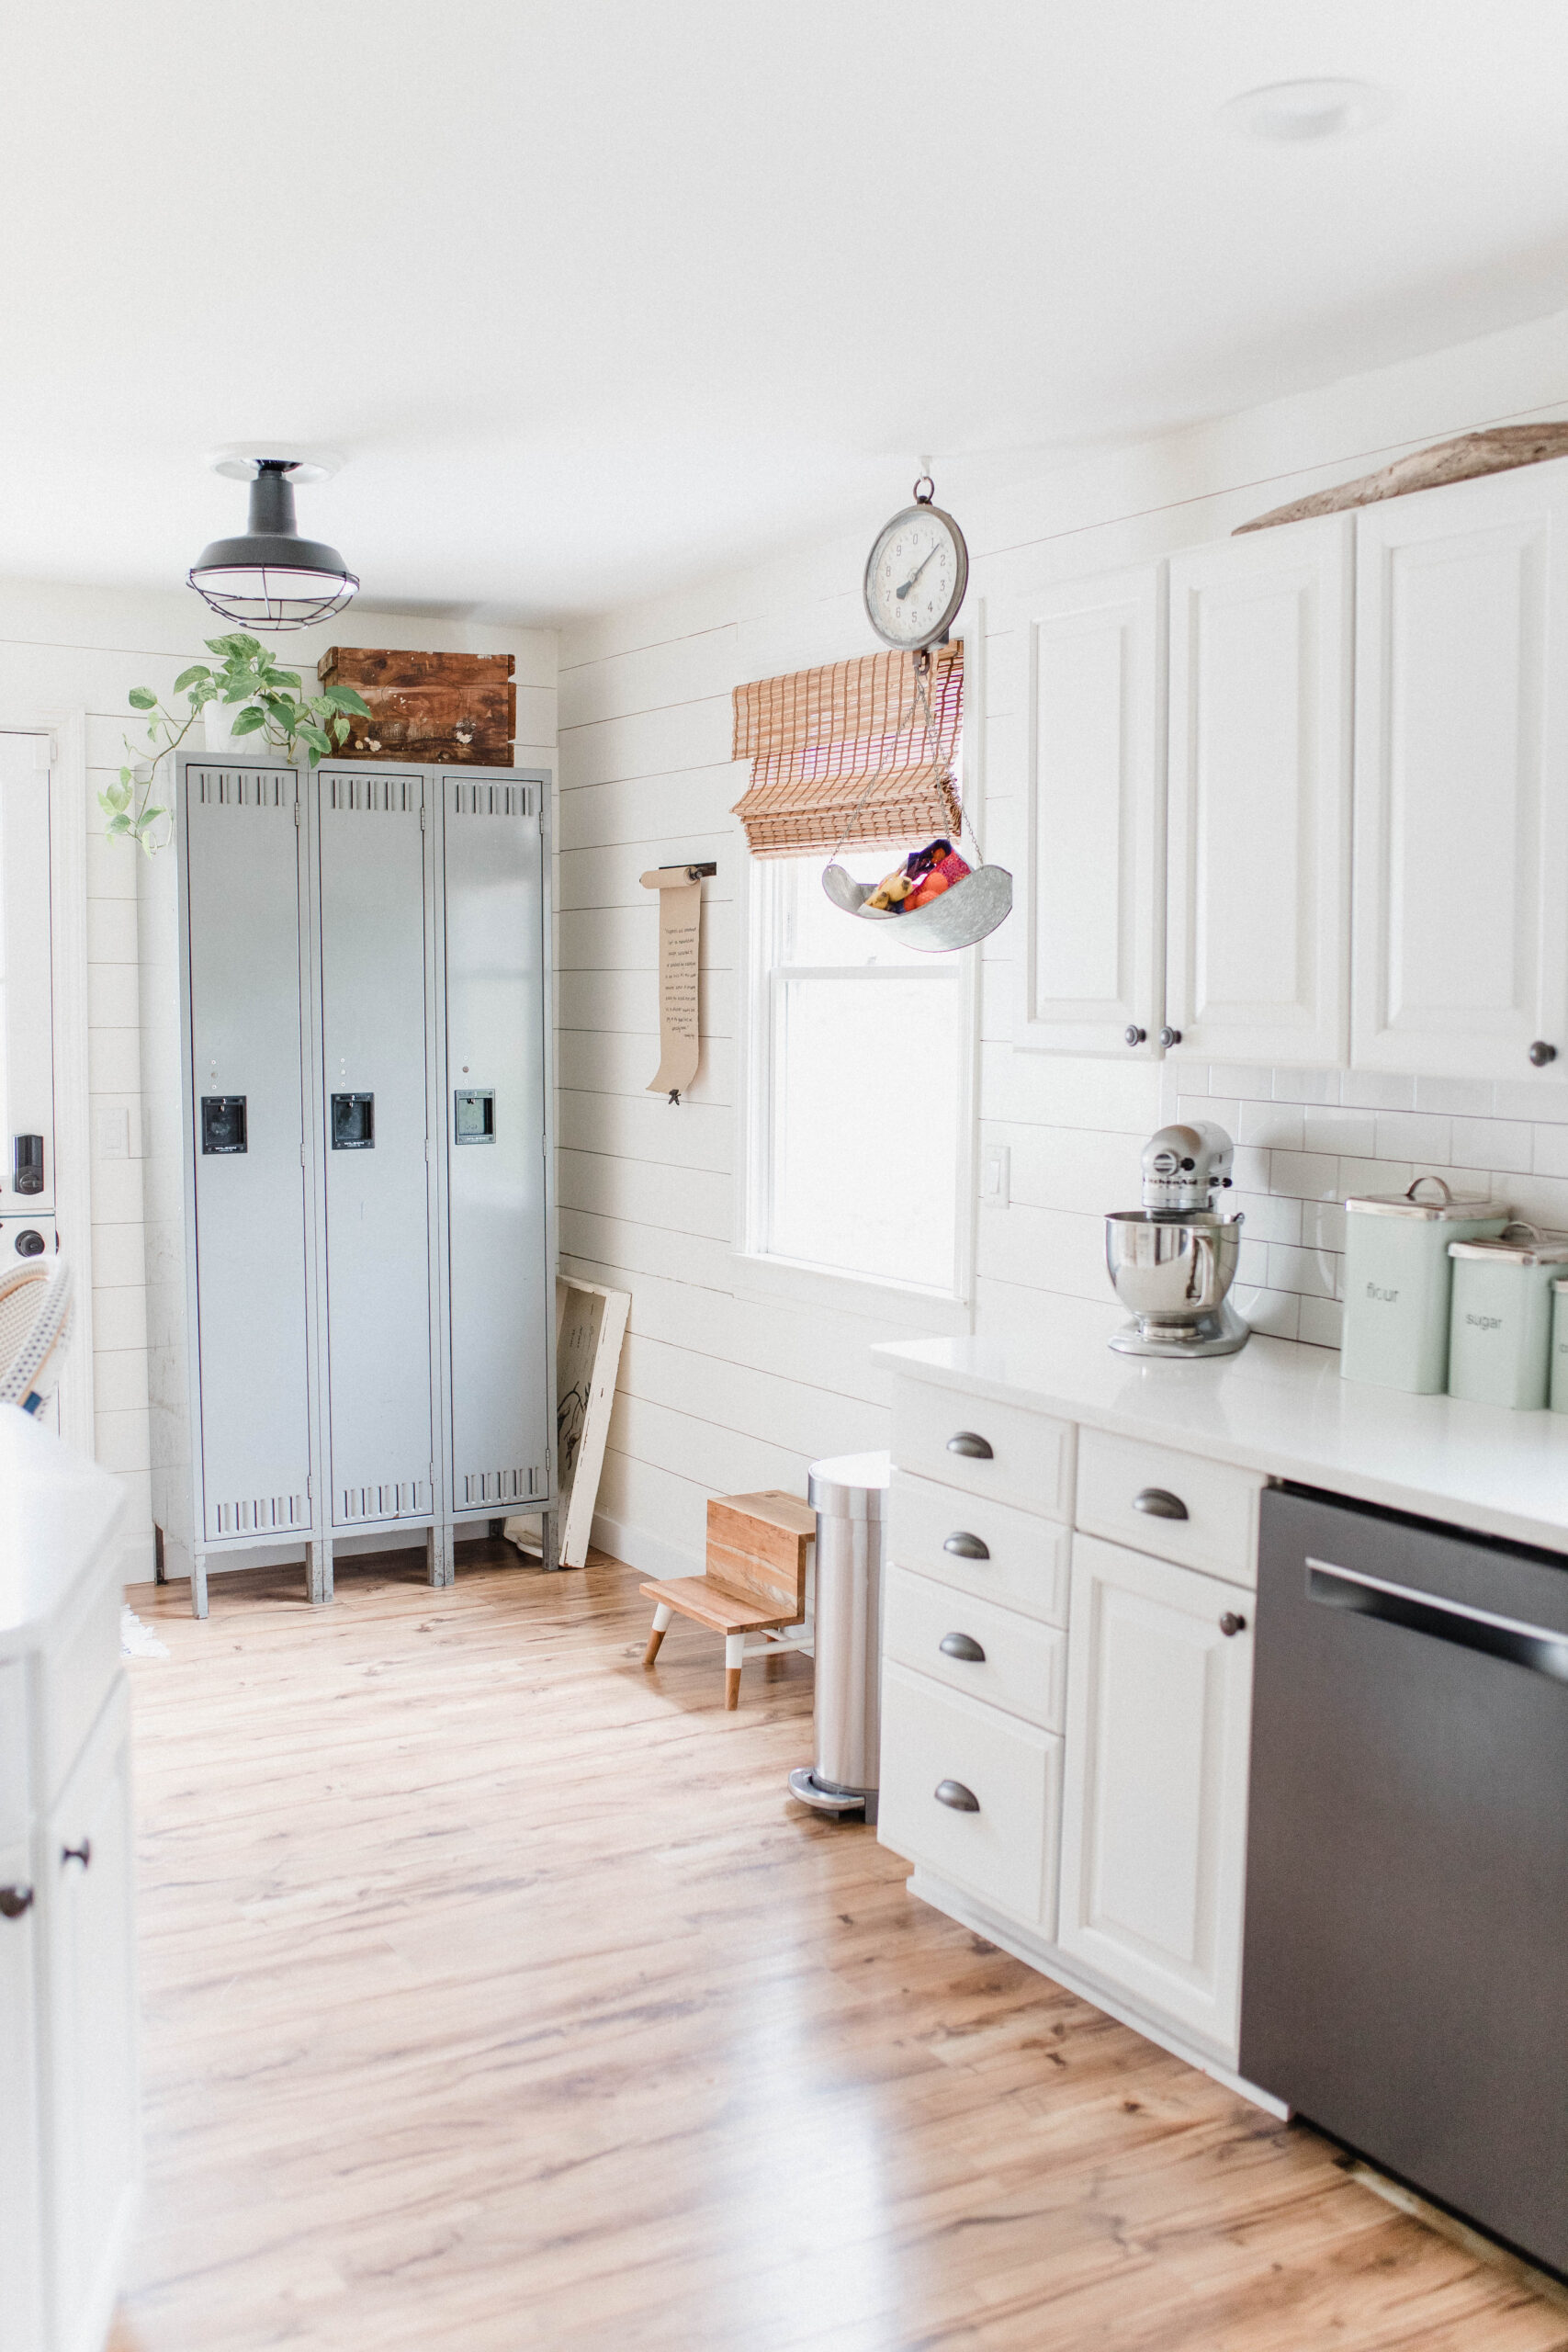 Connecticut life and style blogger Lauren McBride shares her farmhouse inspired kitchen in her coastal farmhouse home, including source list.